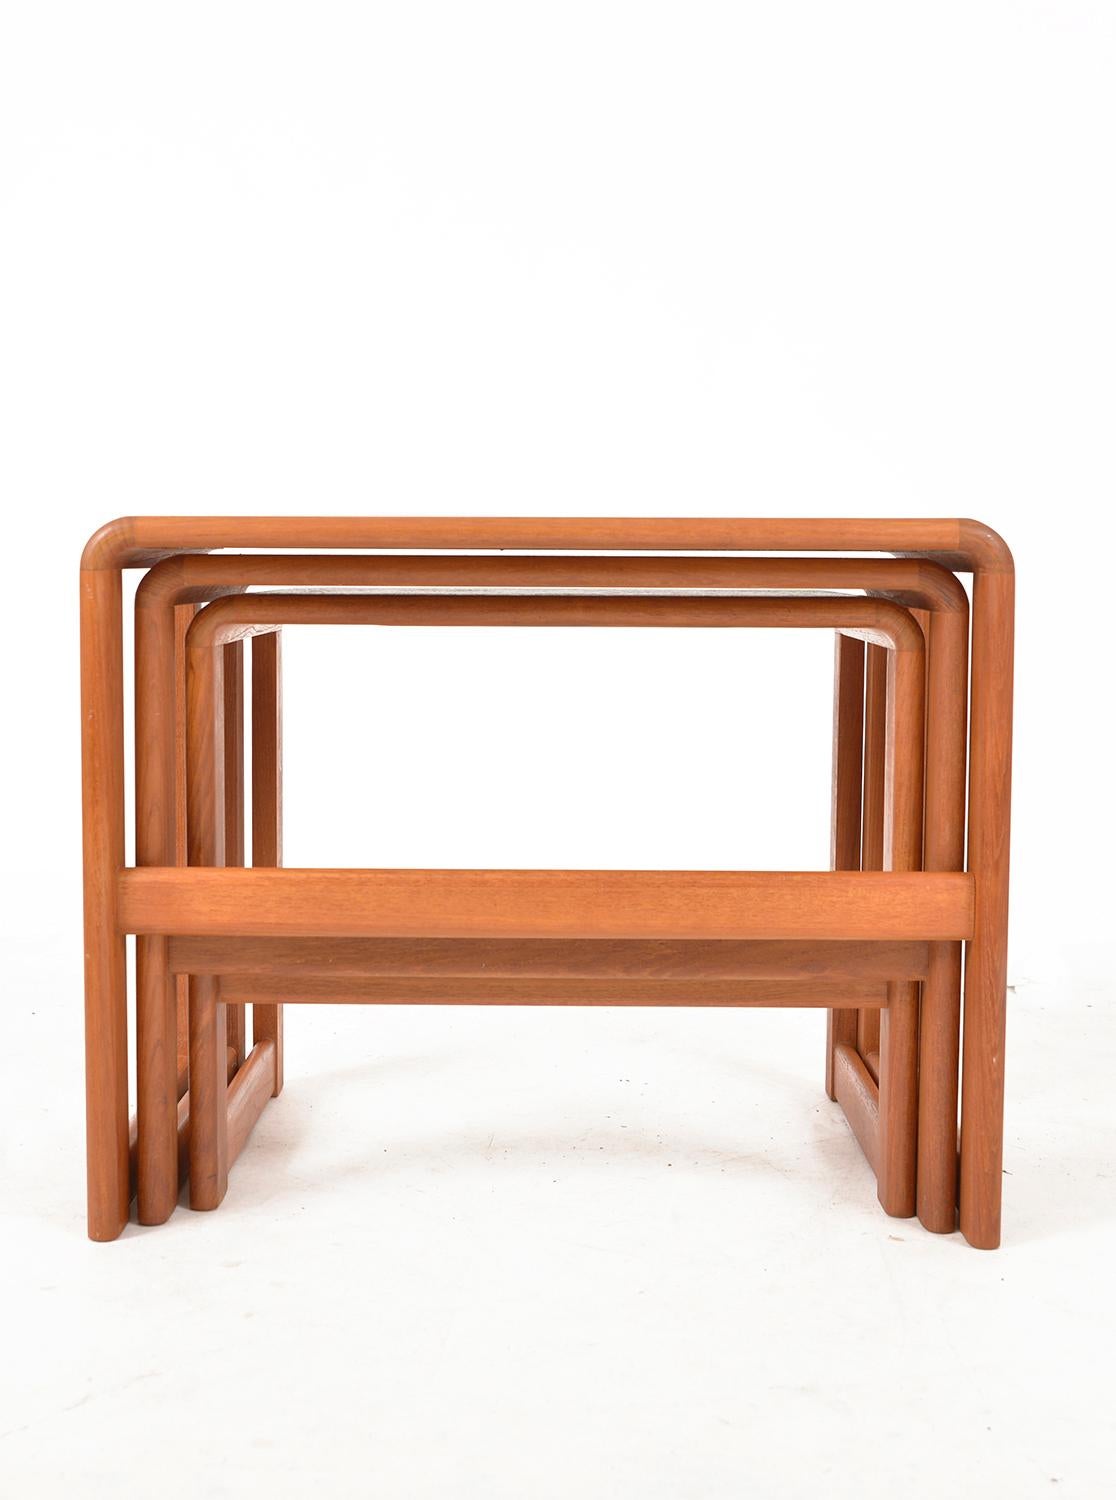 Midcentury Teak Nesting Occasional Tables by O'Donnell Design Irish 1970s Danish For Sale 2